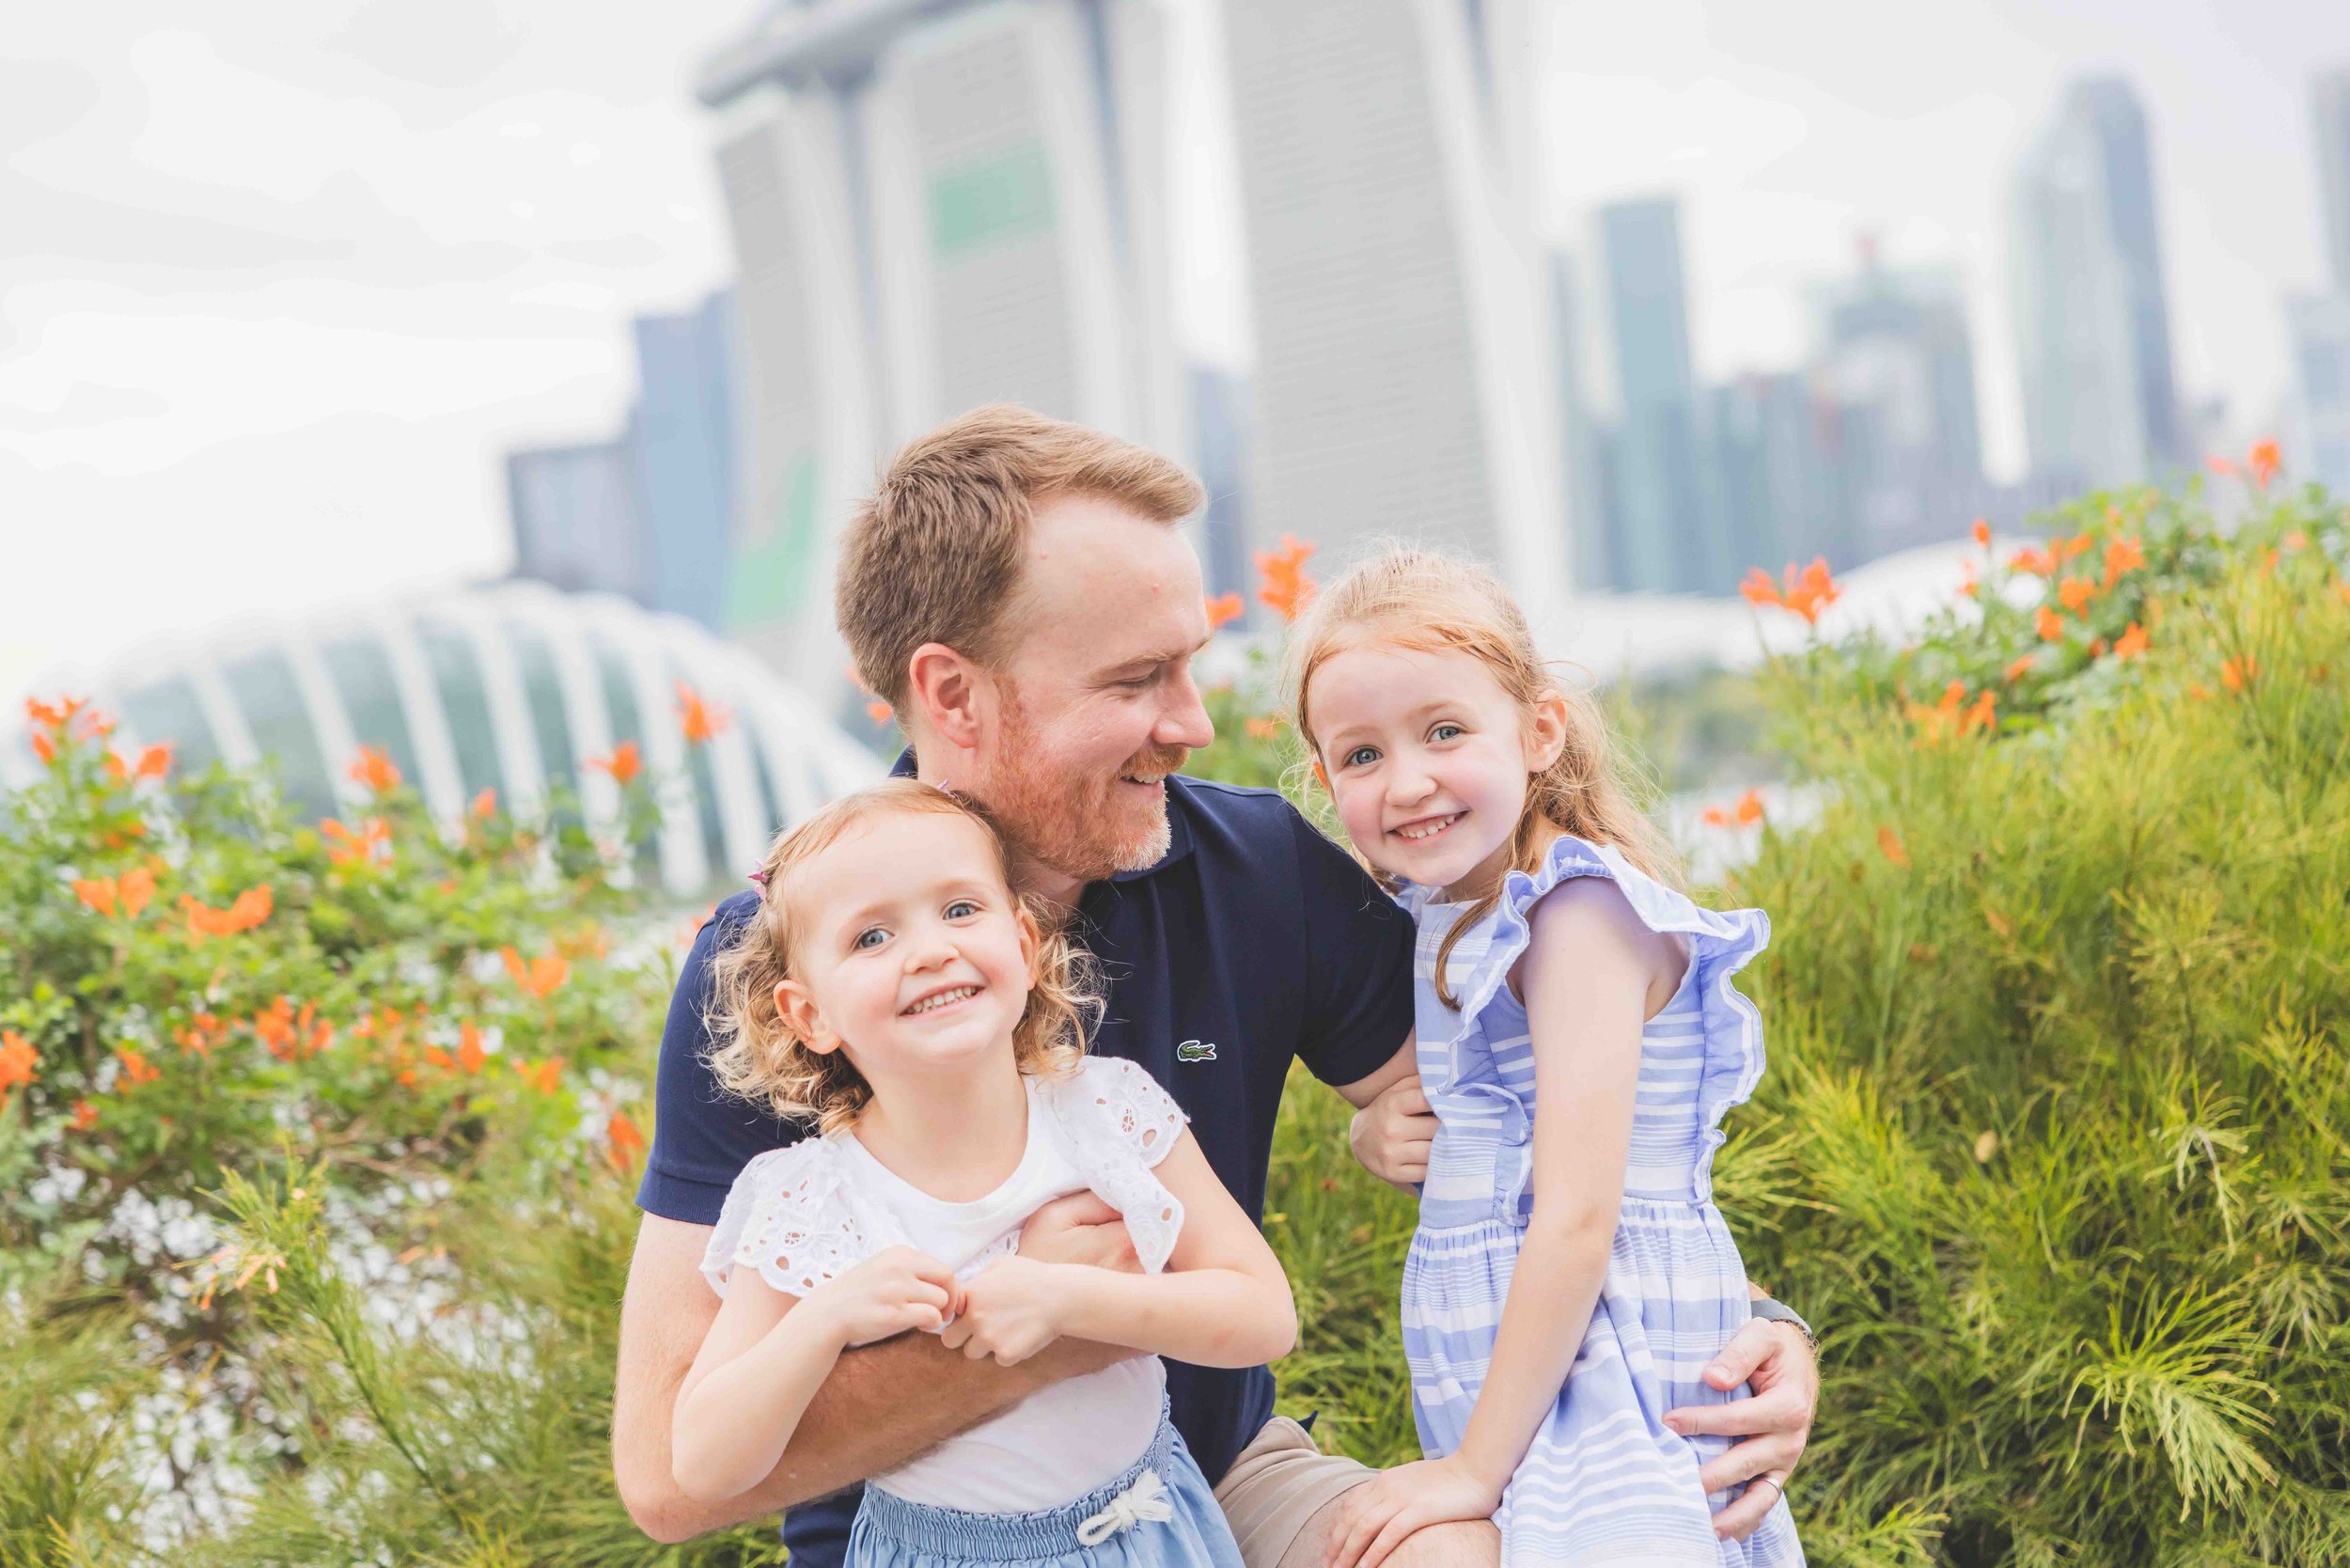 Gardens by the bay east outdoor family shoot-4928.jpg